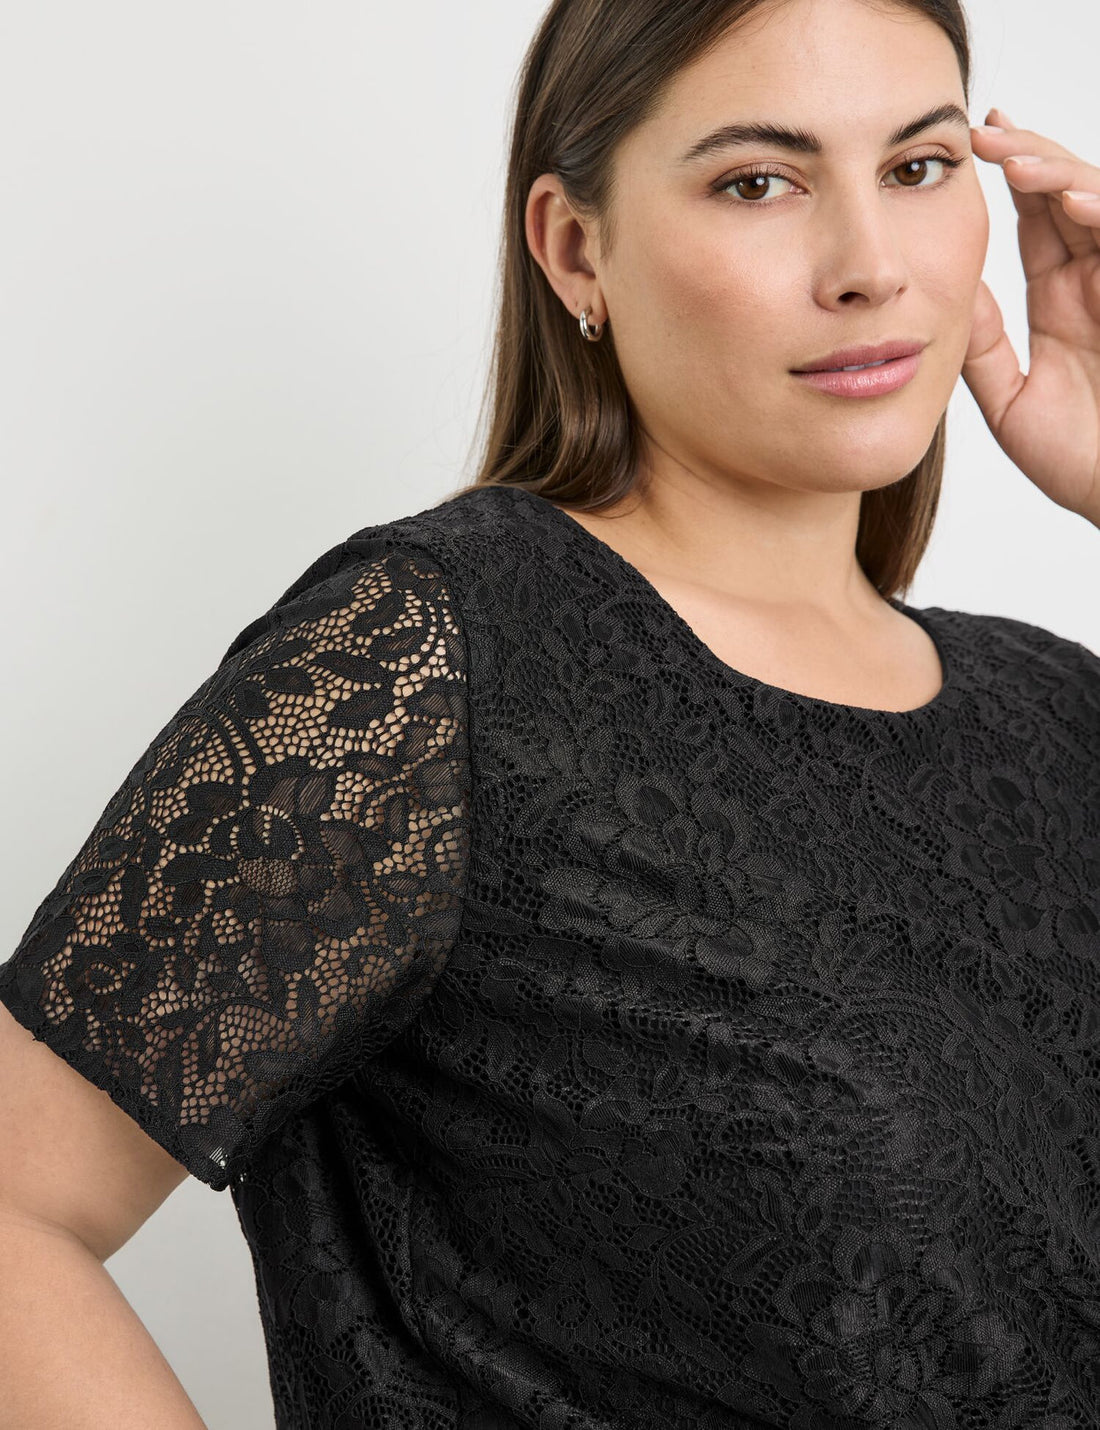 Lace Top_460024-21056_1100_02